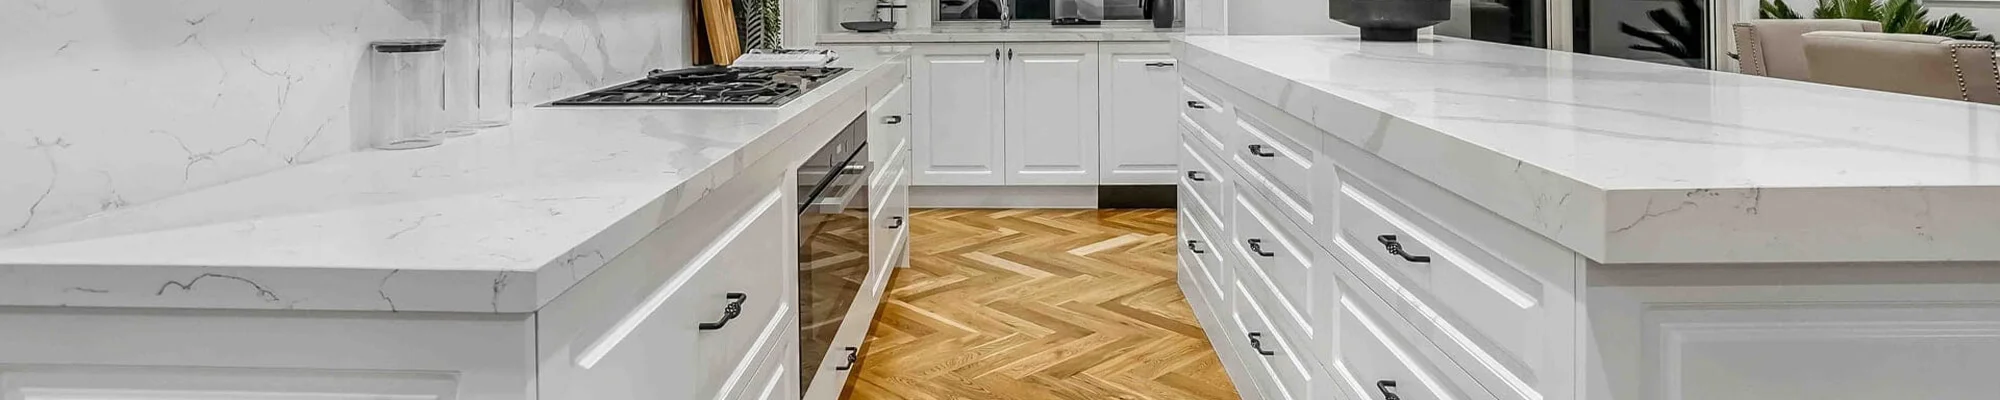 hardwood flooring in kitchen with white countertops